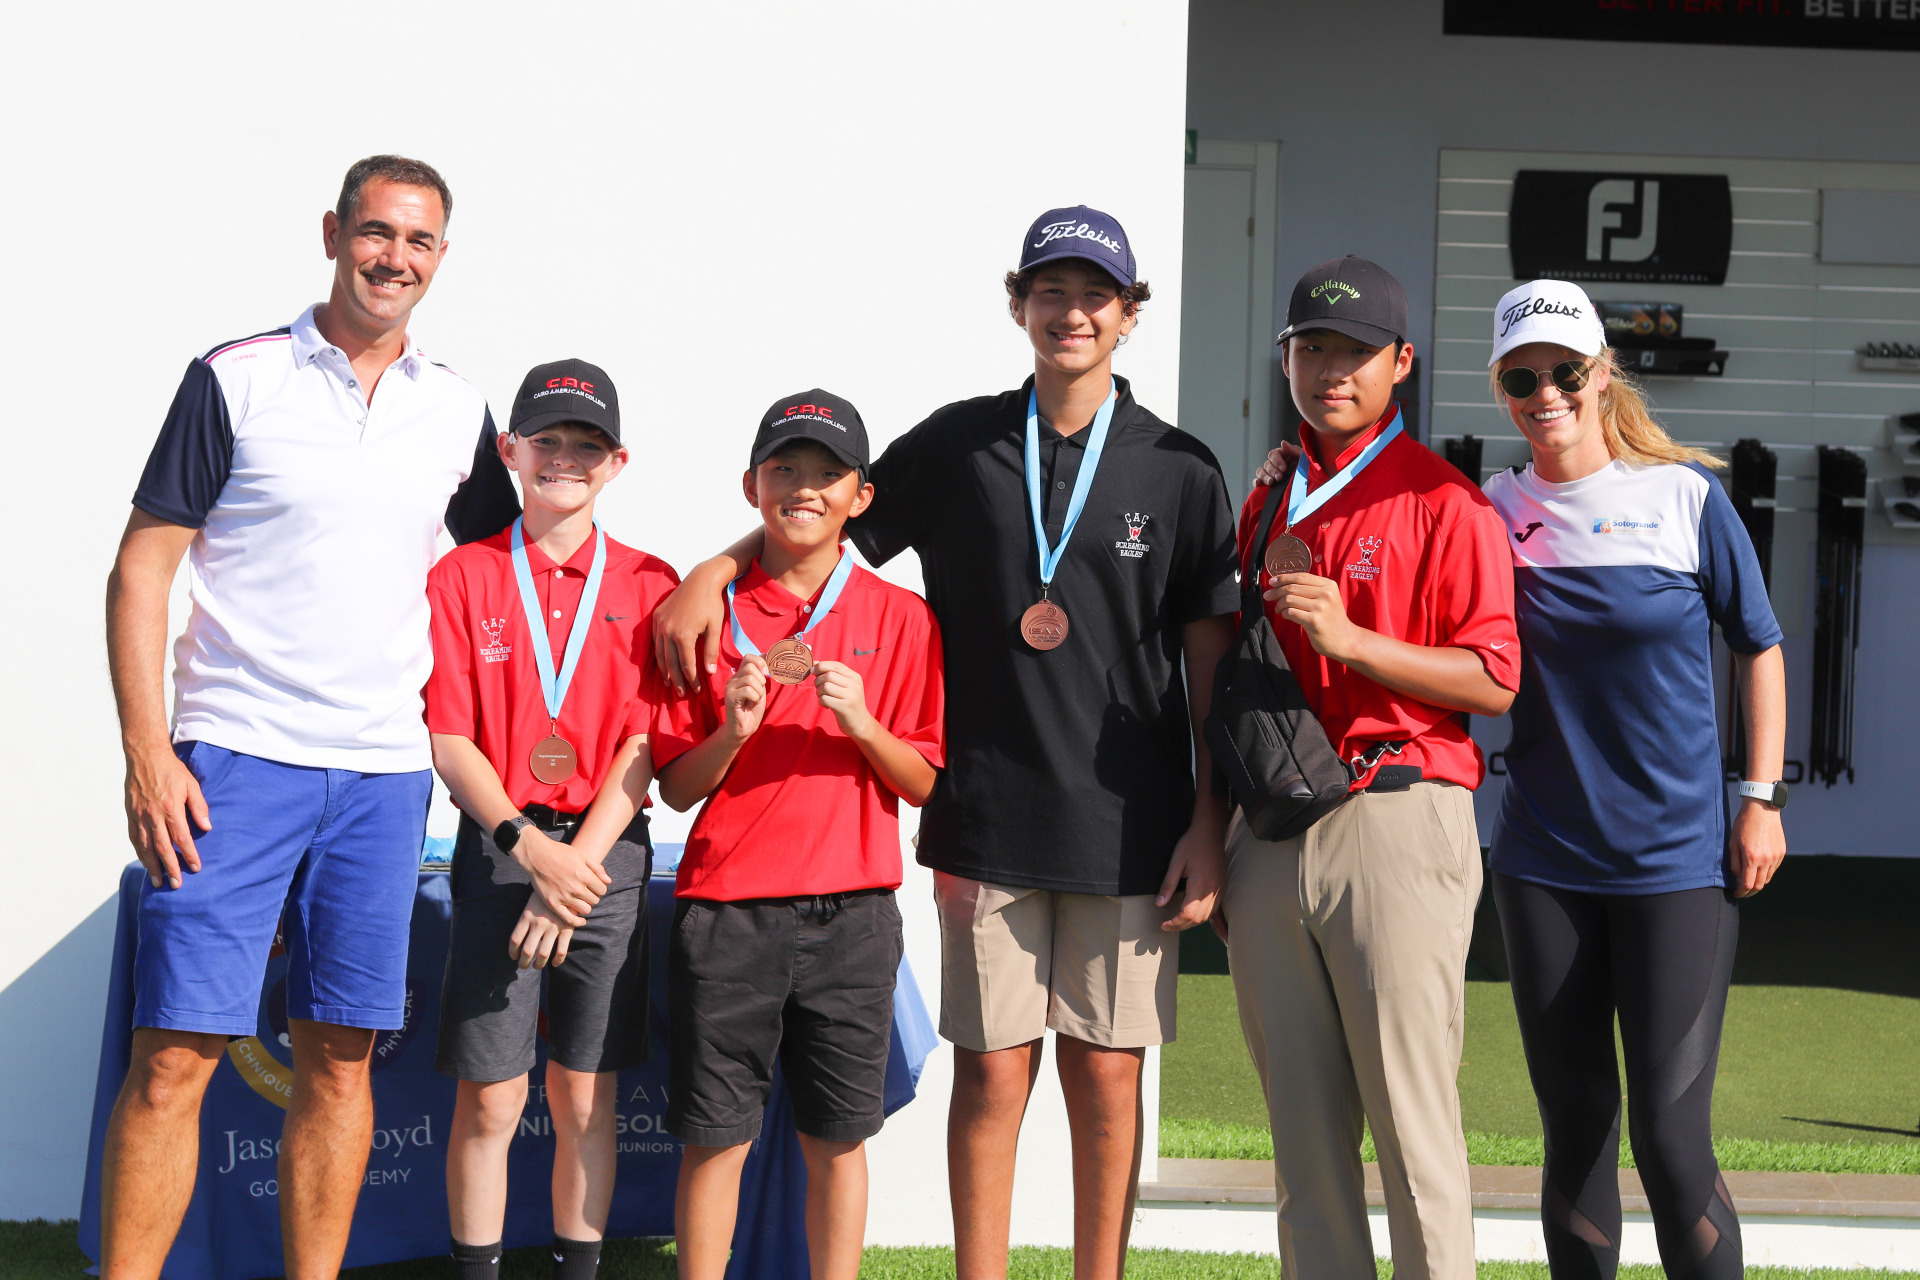 Students from CAC school won third place in the team category of the ISAA Golf Championship.